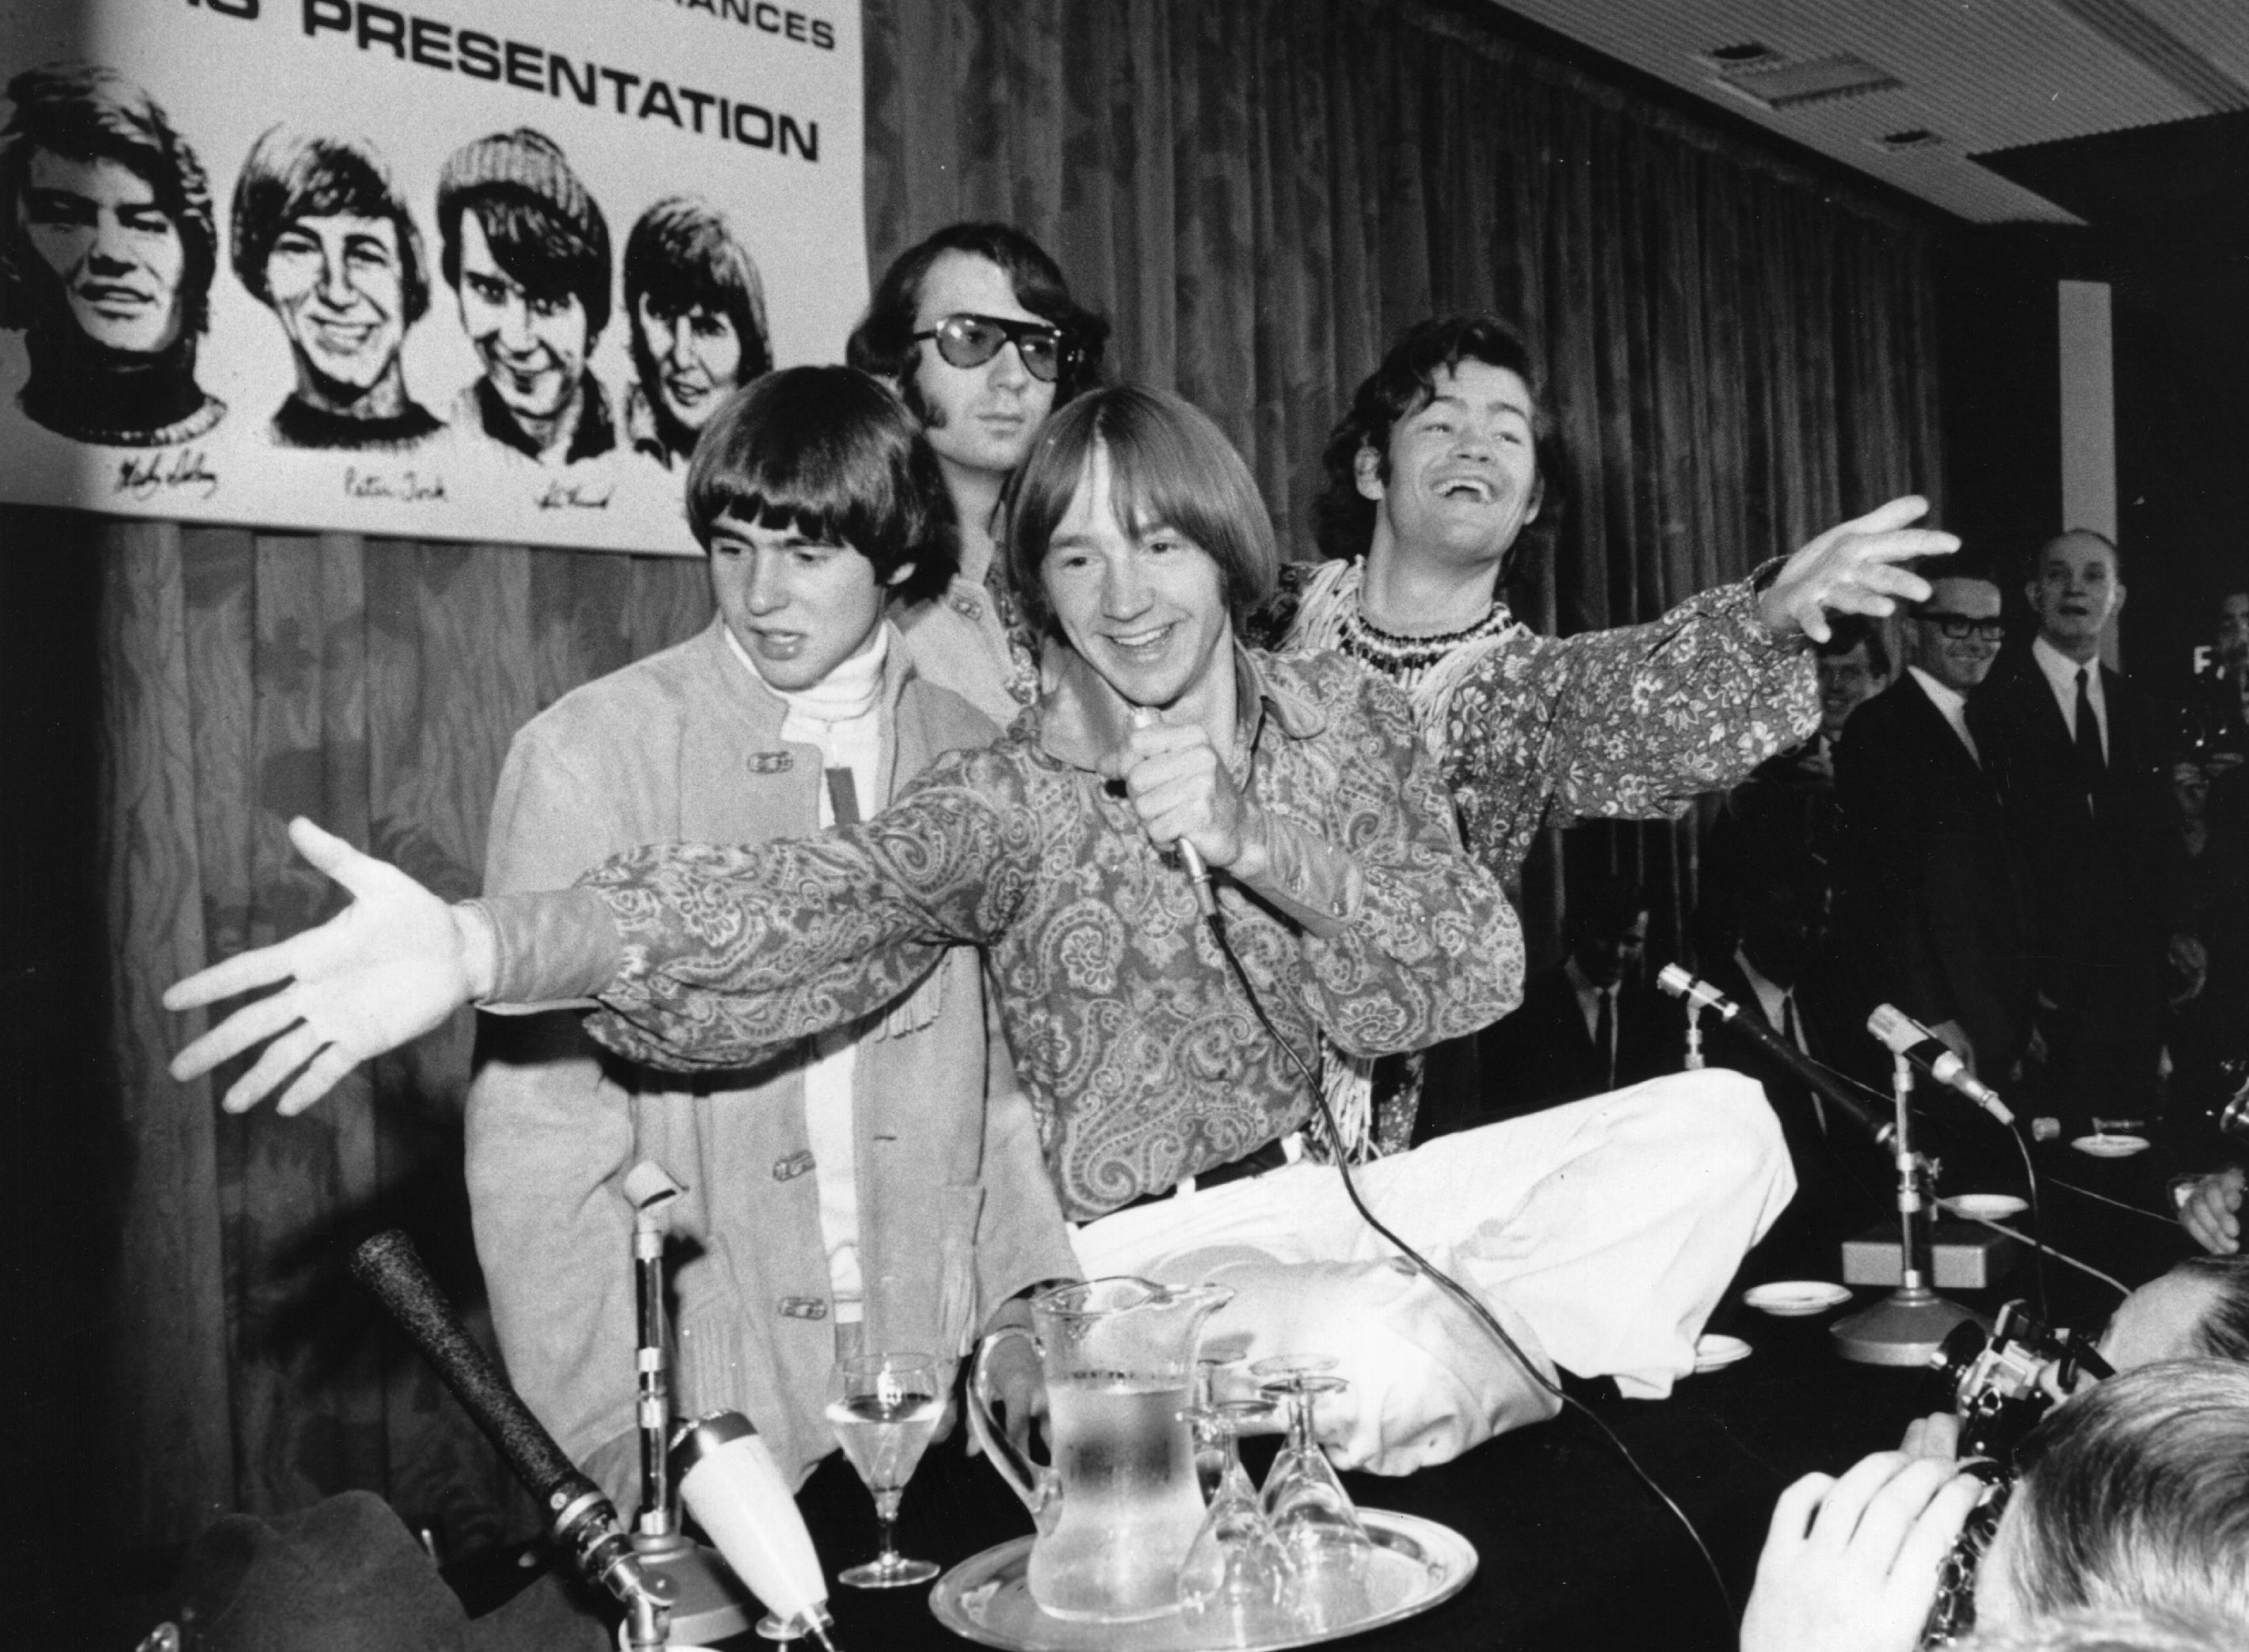 The Monkees’ Davy Jones, Mike Nesmith, Peter Tork, and Micky Dolenz near a pitcher